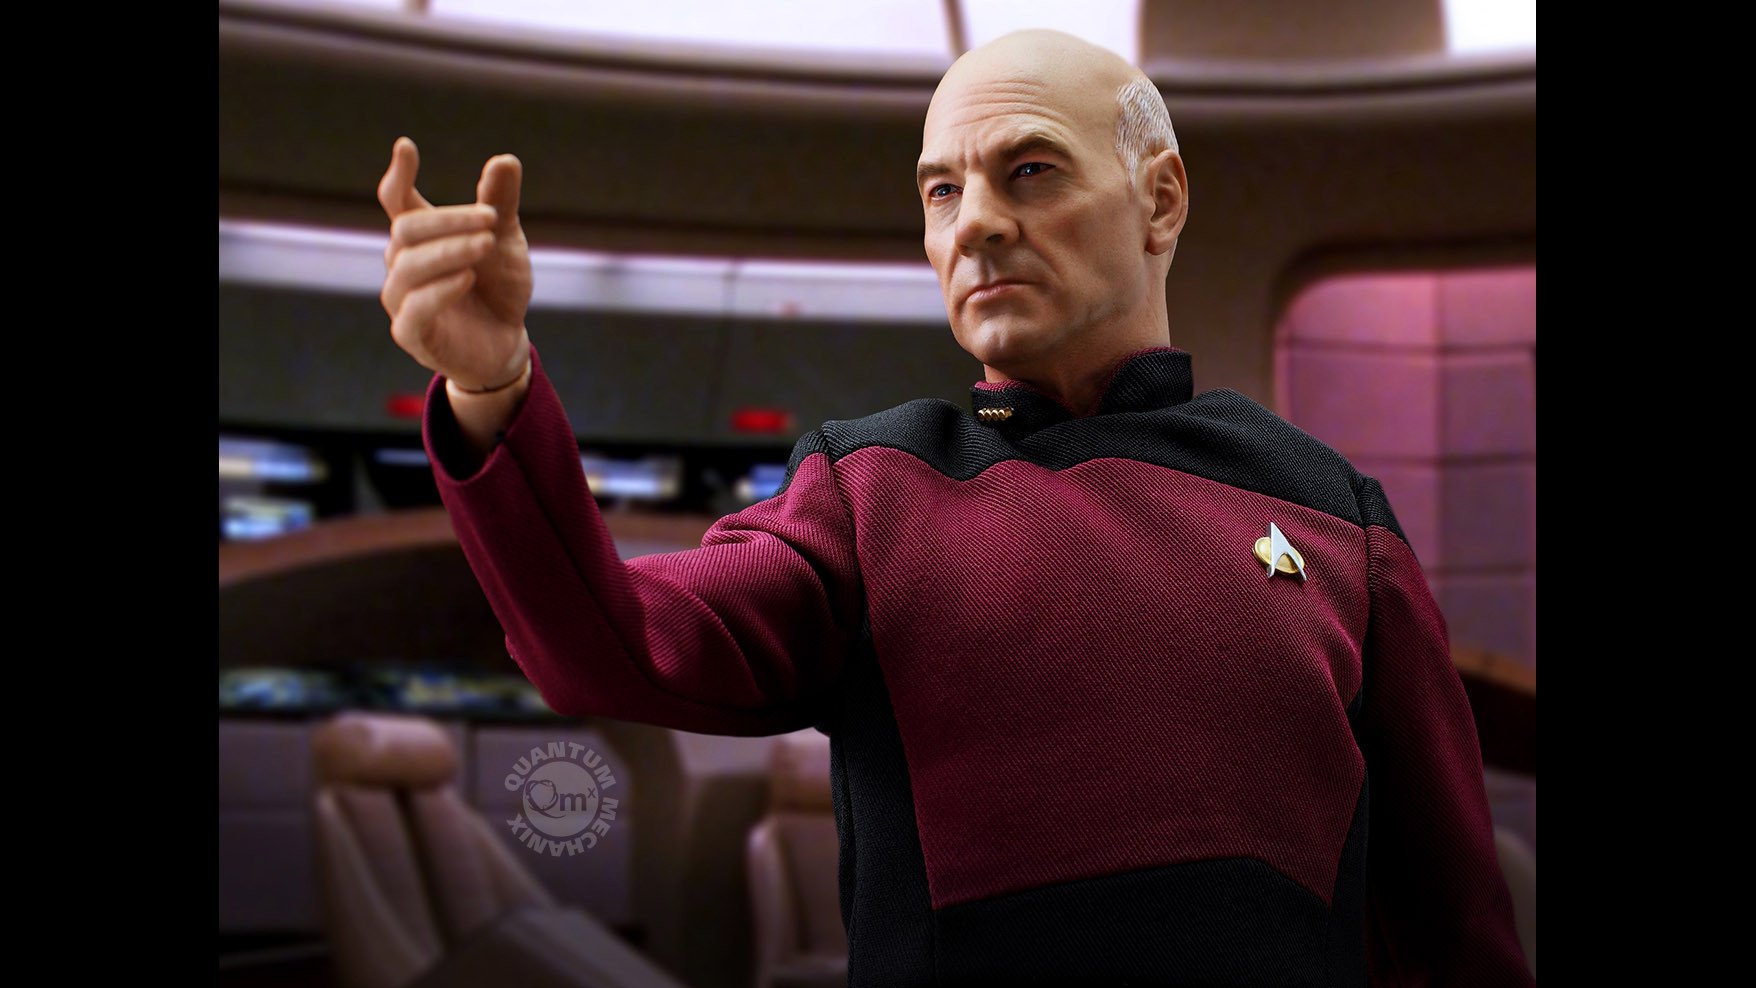 Here’s A Good Picard Figure